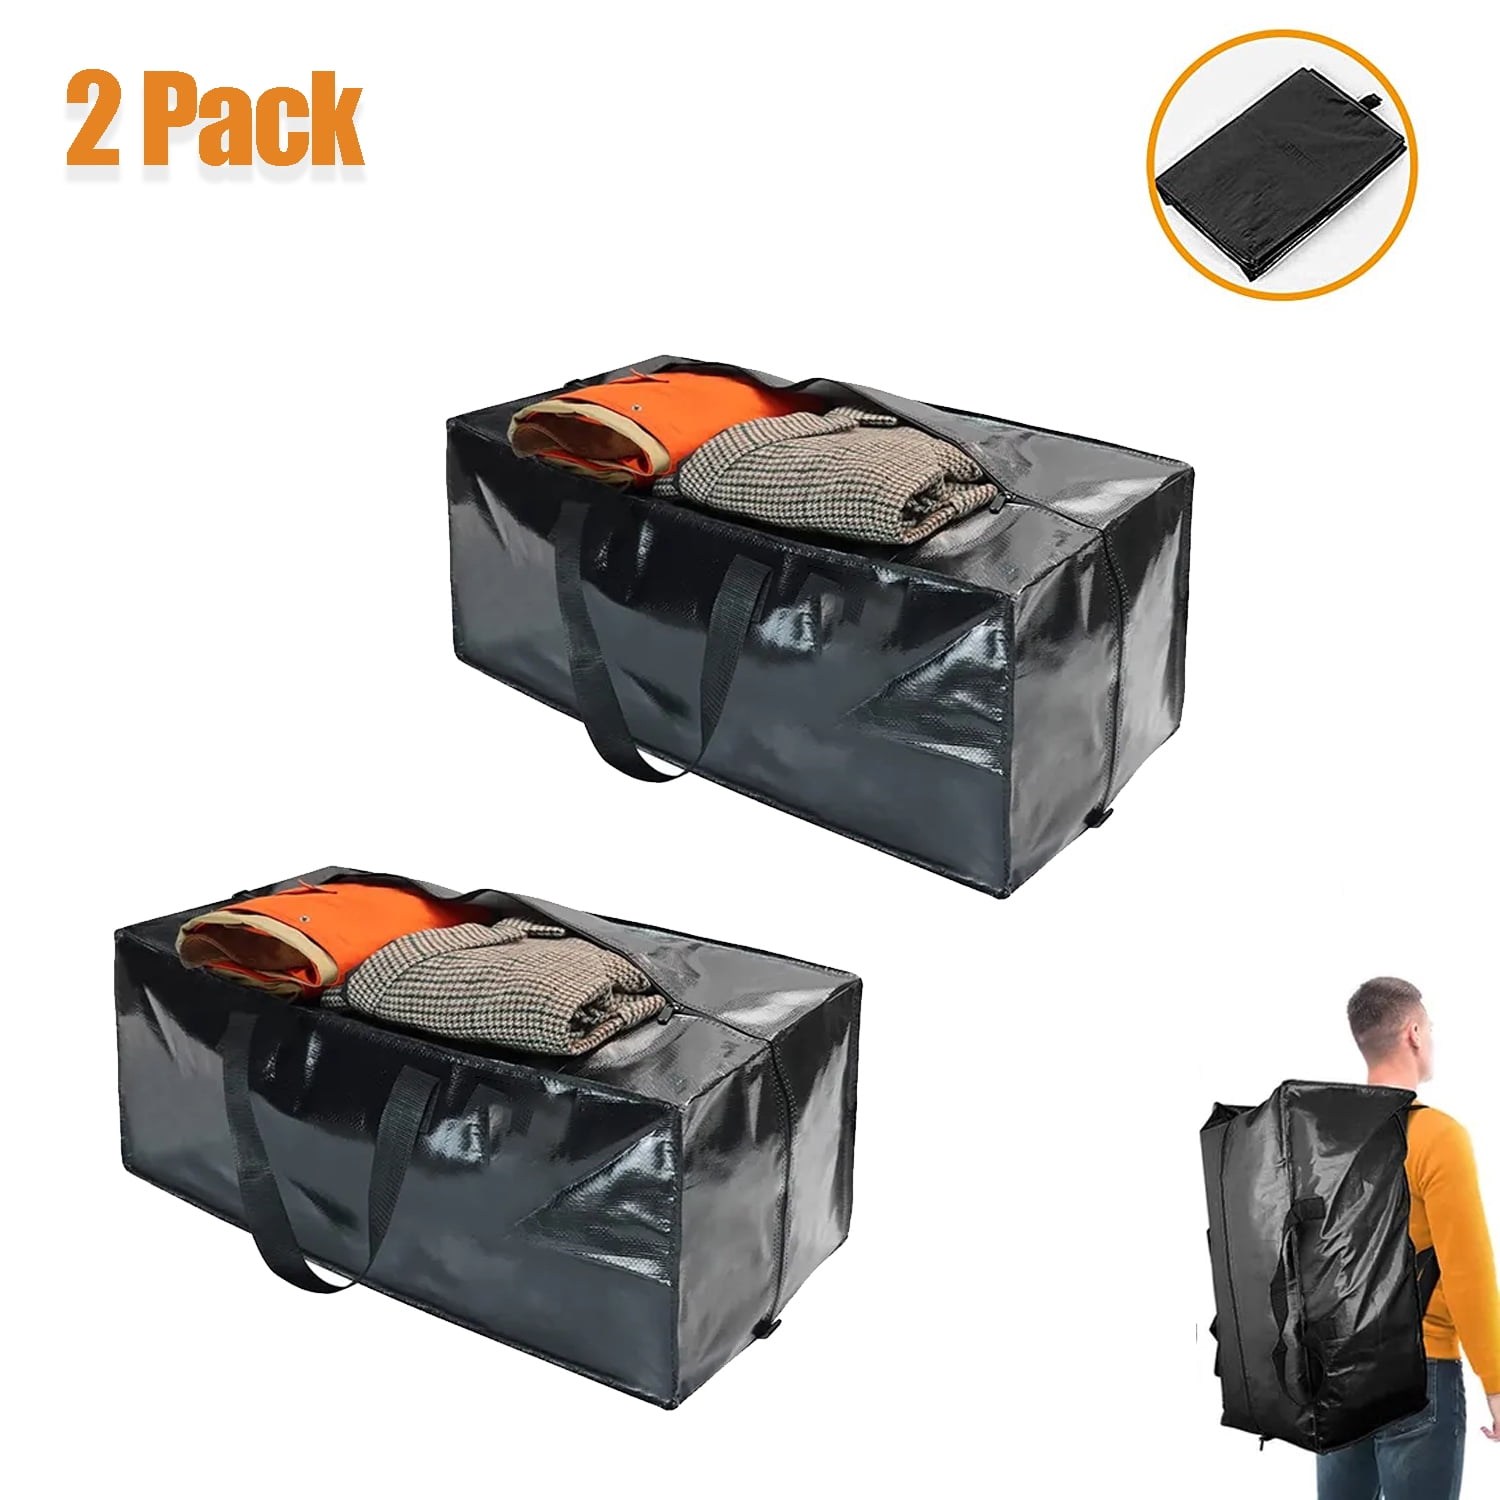 Rihim Moving Bags 90L - 4 Clear Heavy Duty Extra Large Storage Bags for Clothes - Packing Bags with Backpack Straps Strong Handles Zippers - College T